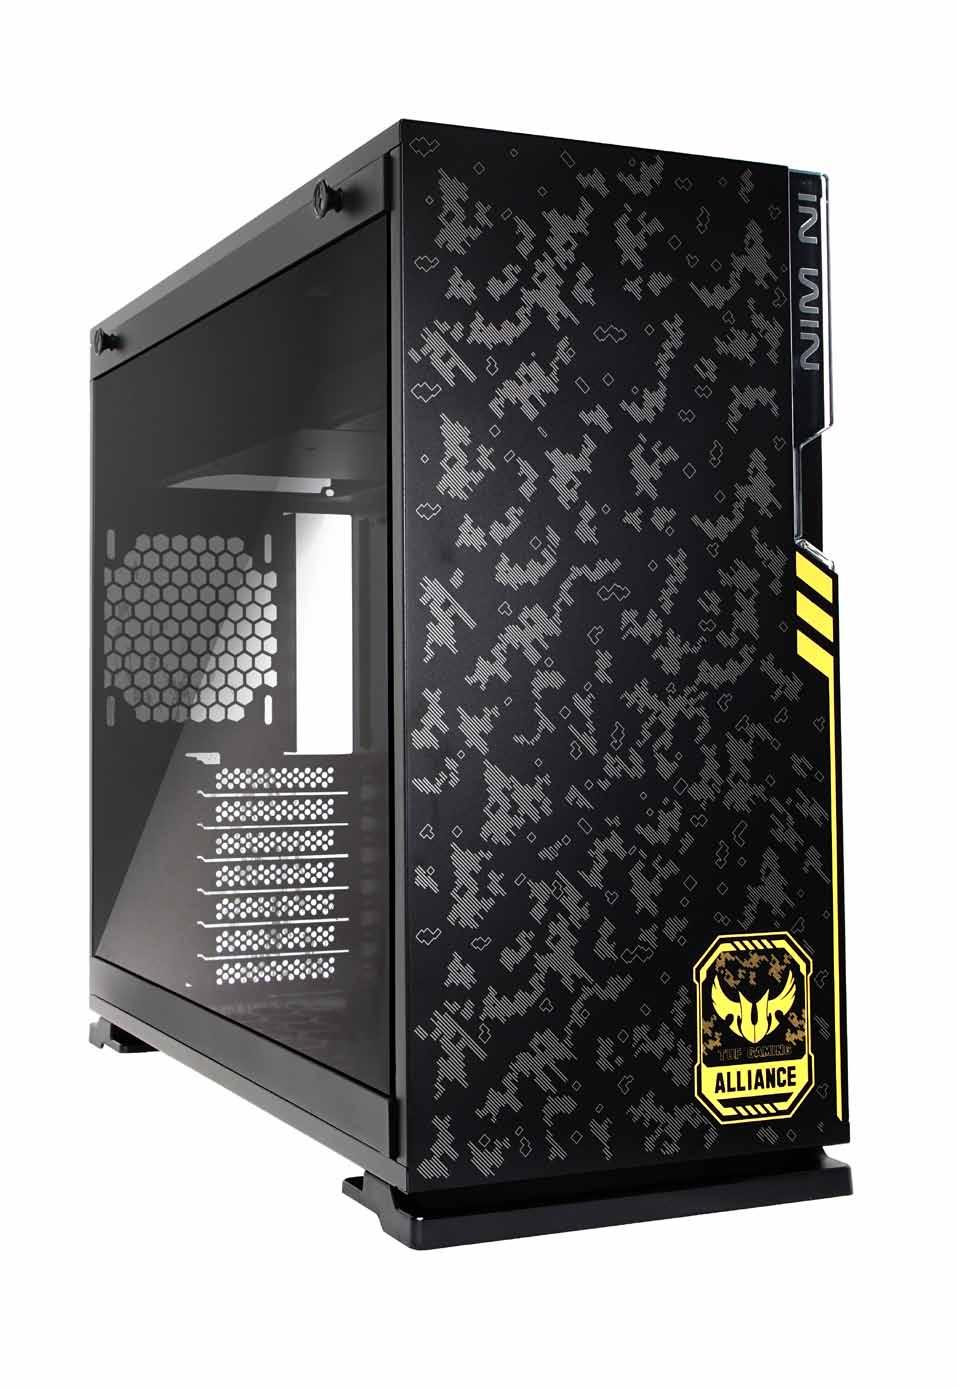 The exterior screams TUF, as the rugged steel enclosure is covered with a military design